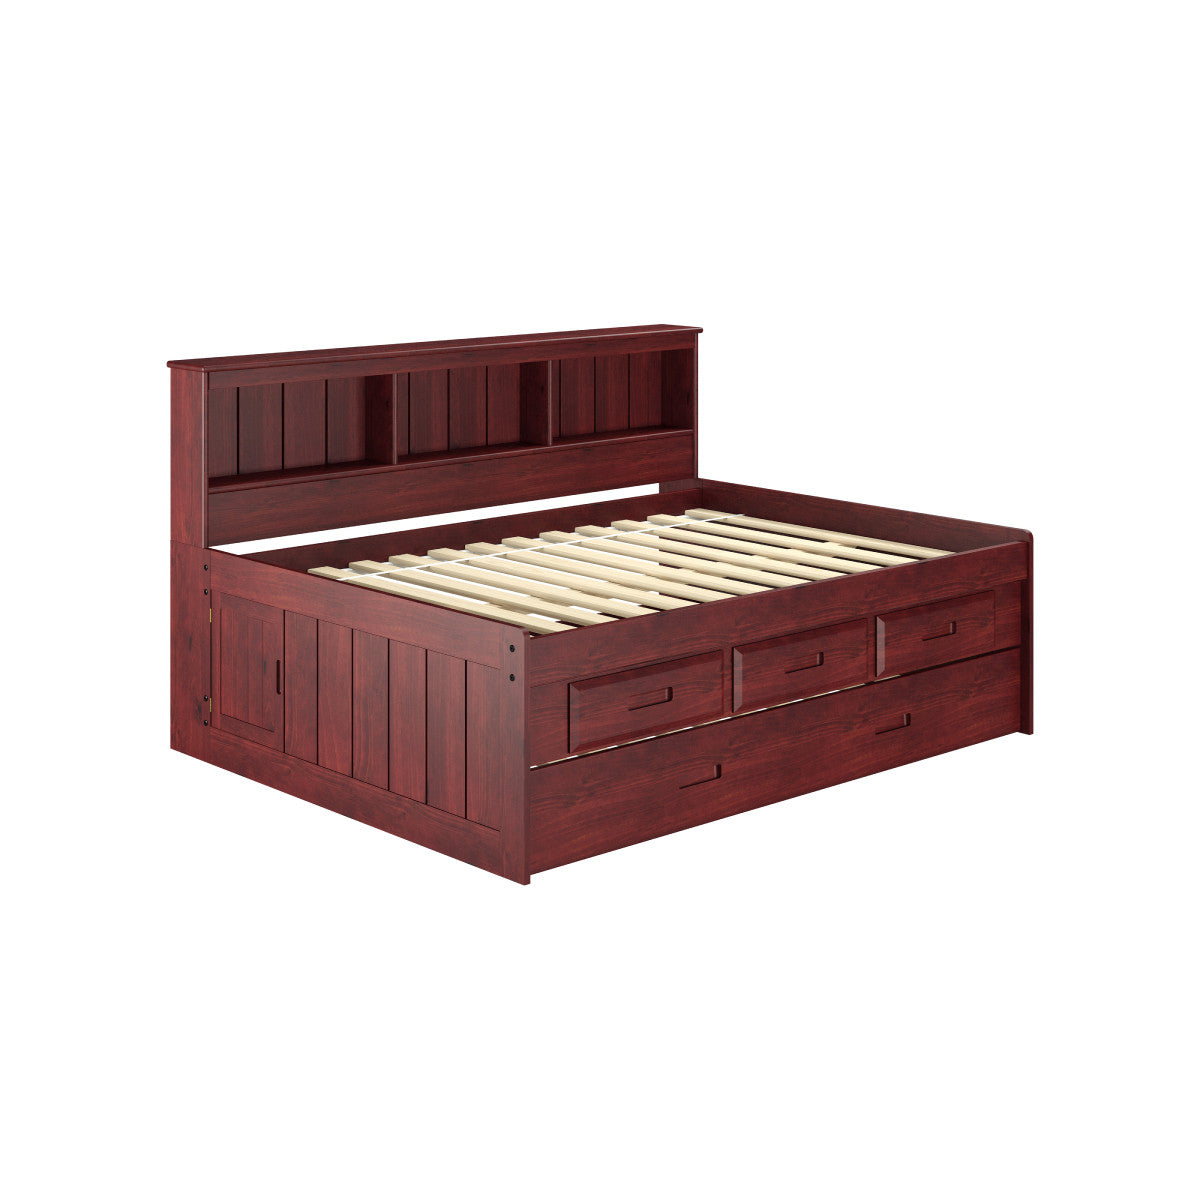 FULL DAYBED BOOKCASE CAPTAINS BED WITH 3 DRAWER STORAGE AND TWIN TRUNDLE IN MERLOT FINISH